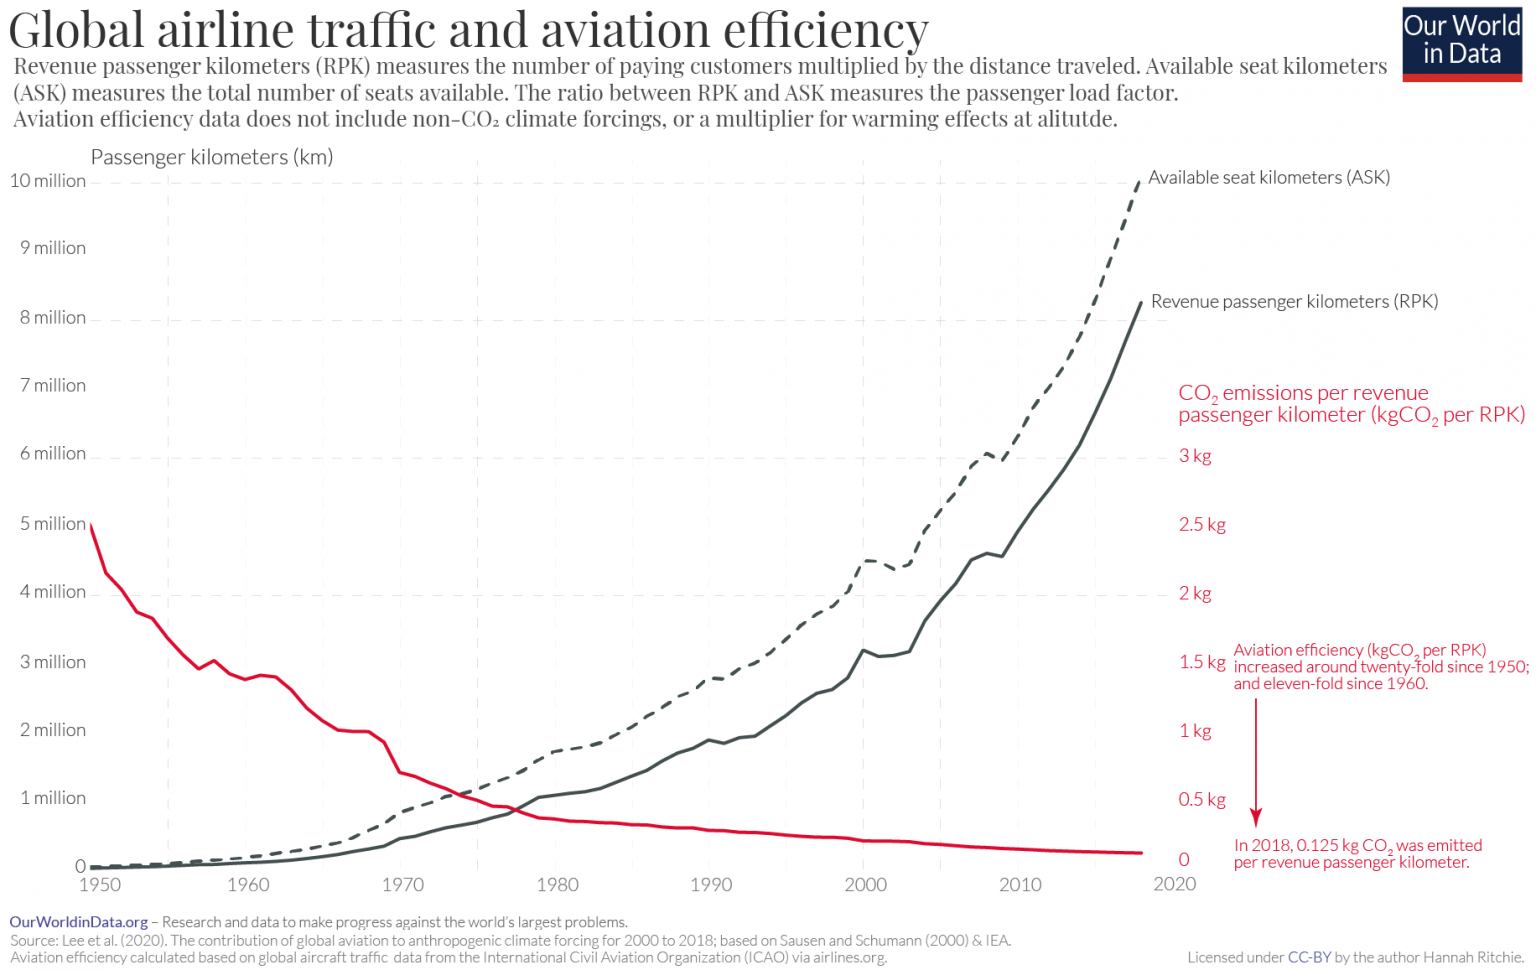 Graph showing global airline traffic and aviation efficiency in passenger kilometers overtime from 1950 to 2020.